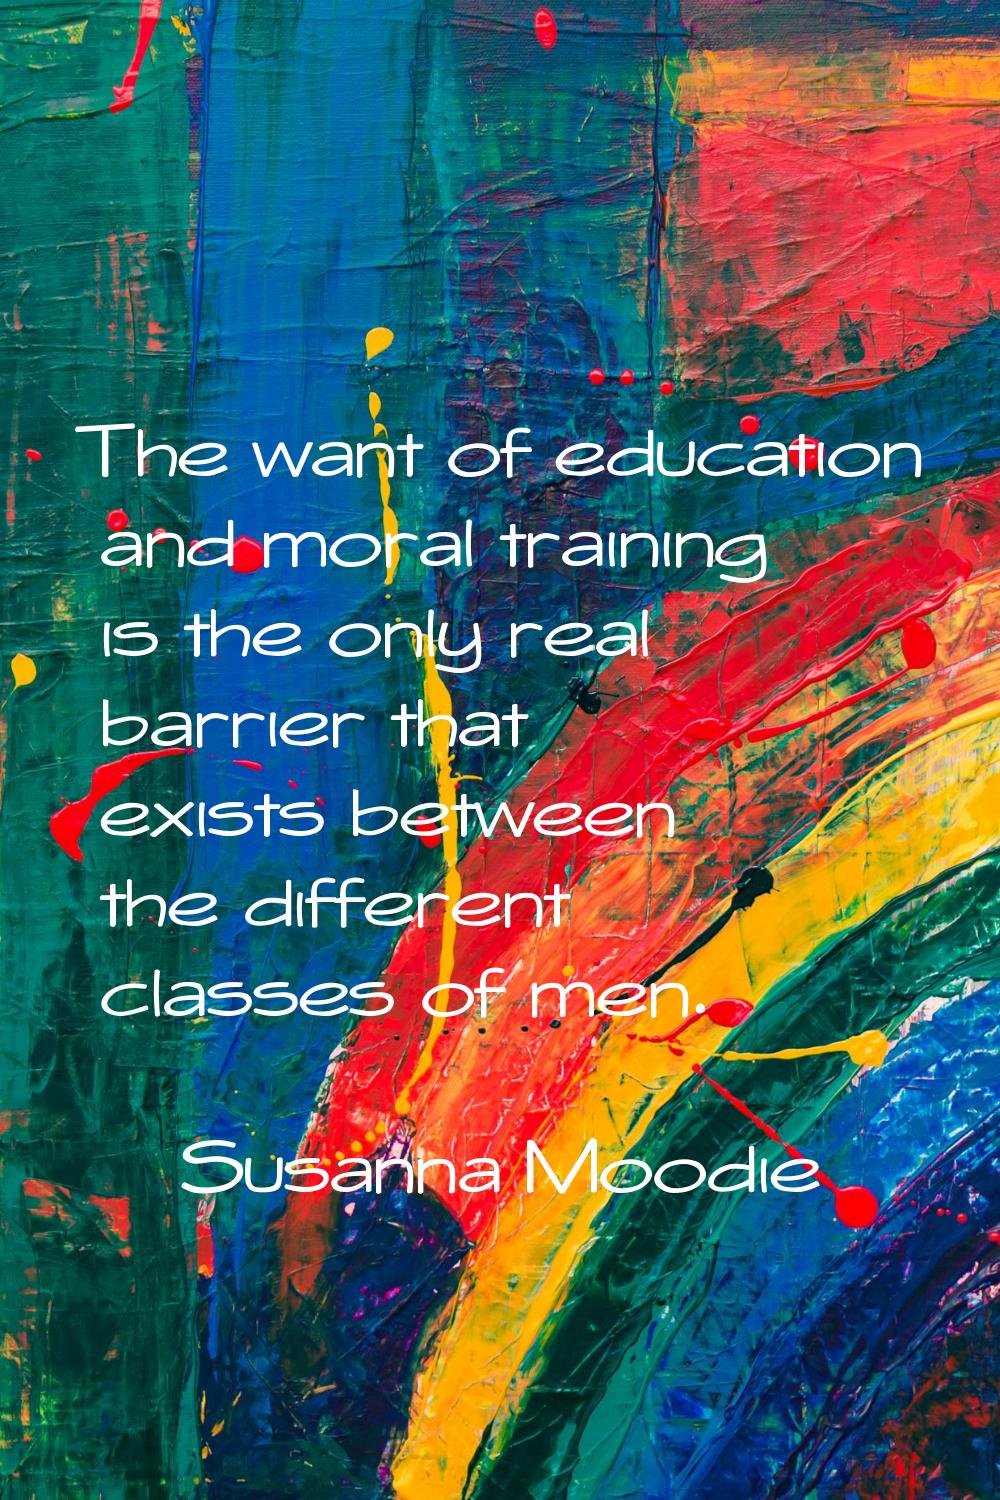 The want of education and moral training is the only real barrier that exists between the different